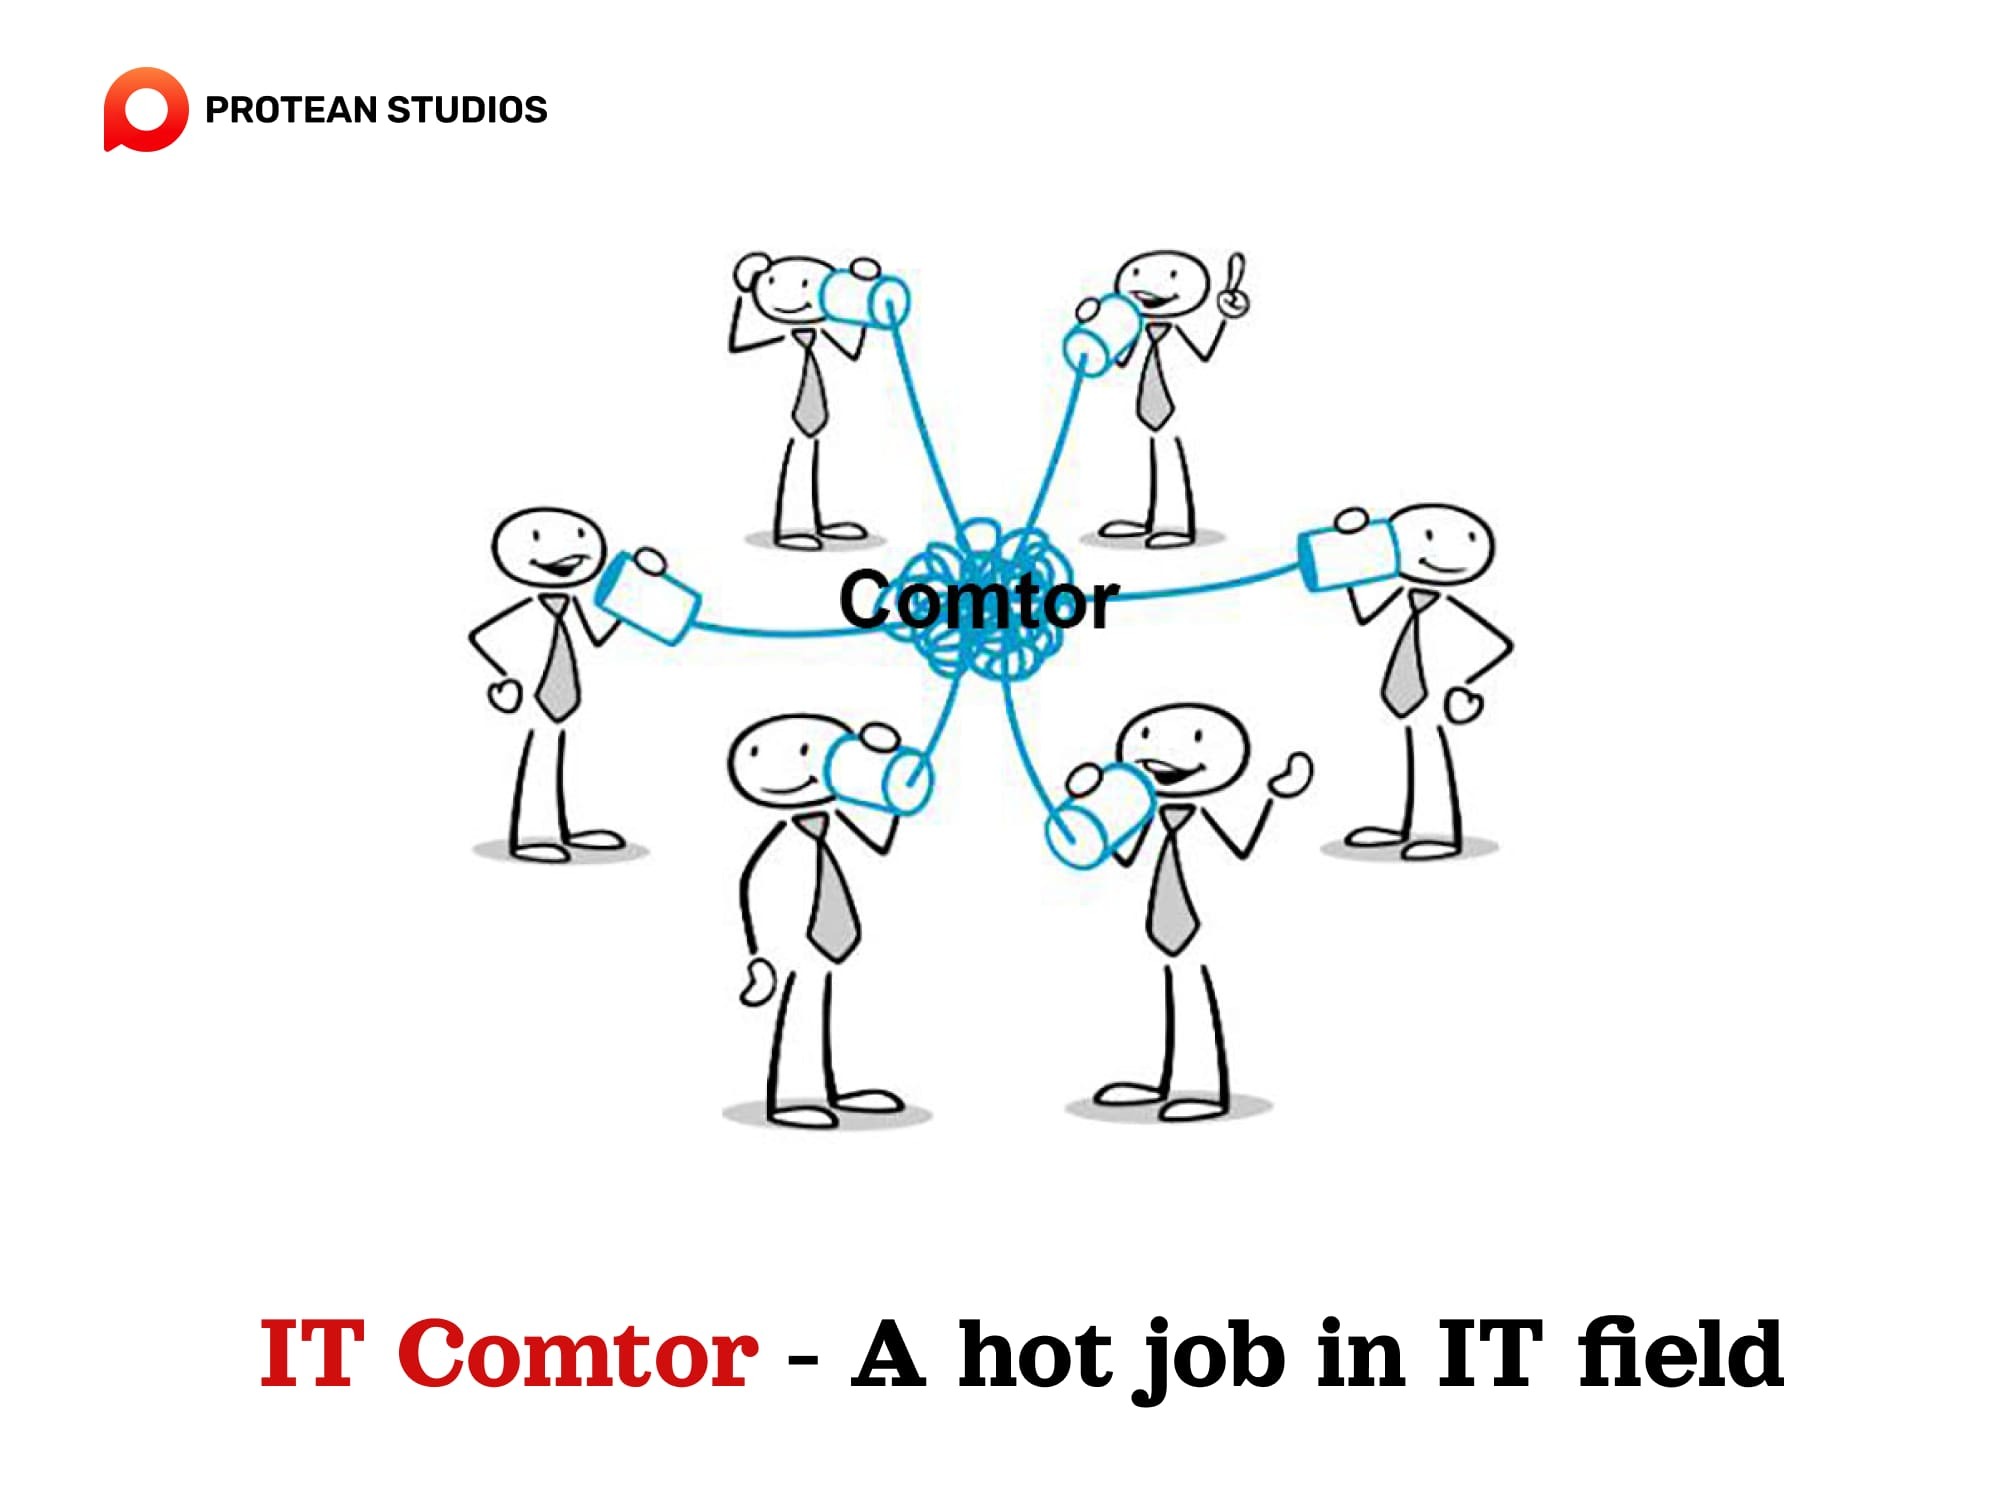 Characteristics and nature of IT Comtor work